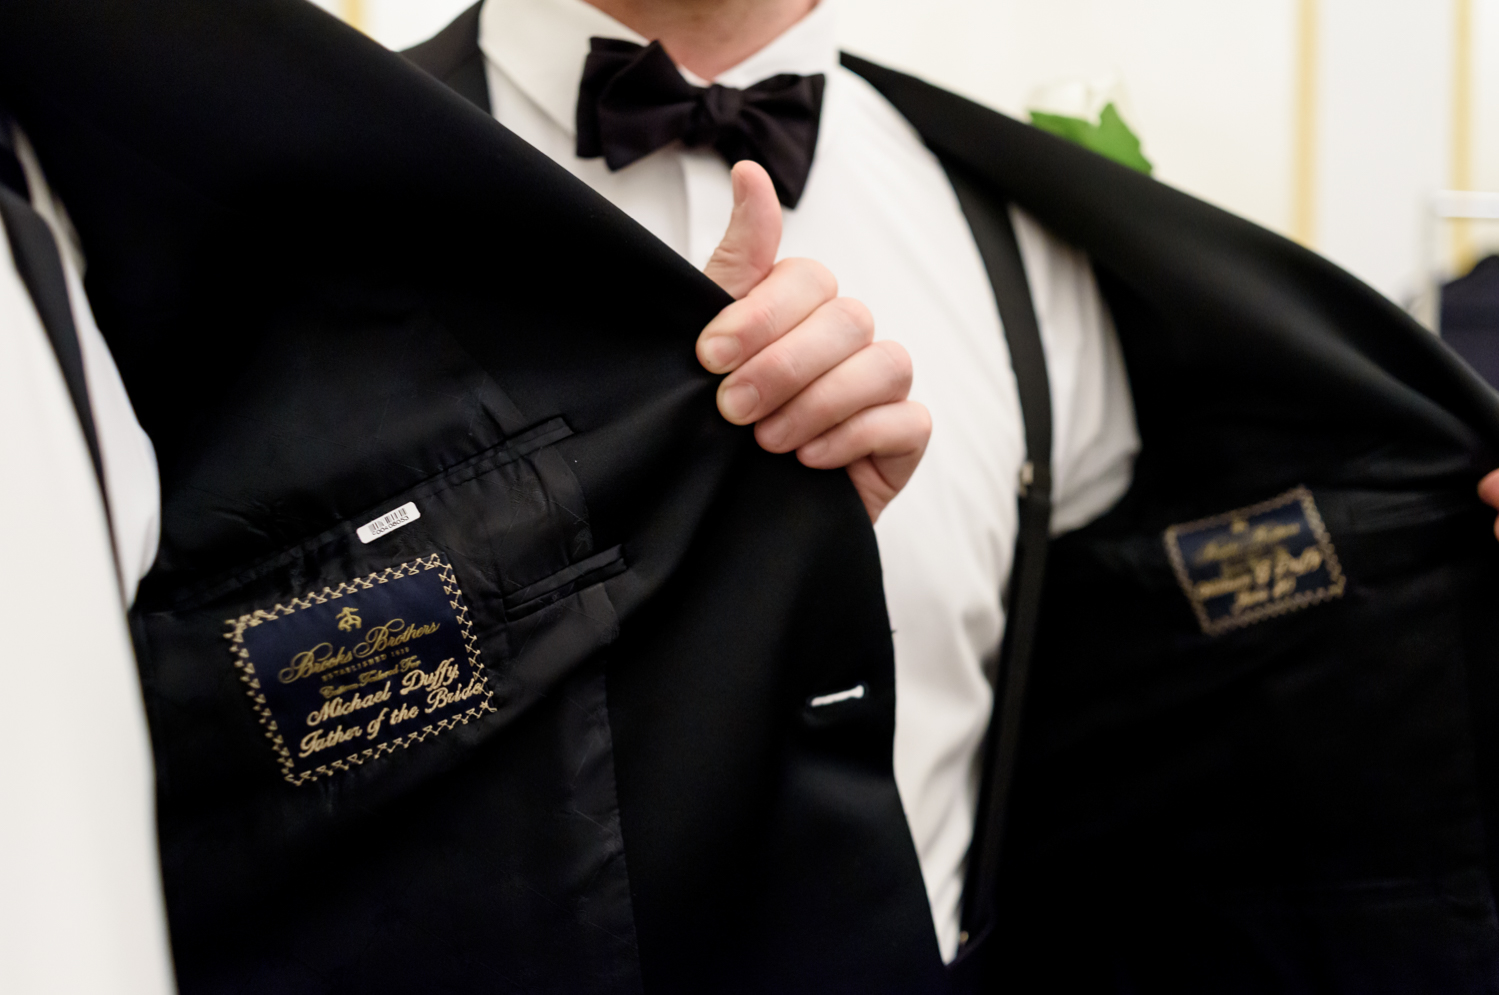 The inside of the father of the bride's suit jacket has been customized with his name and "father of the bride" in gold script.